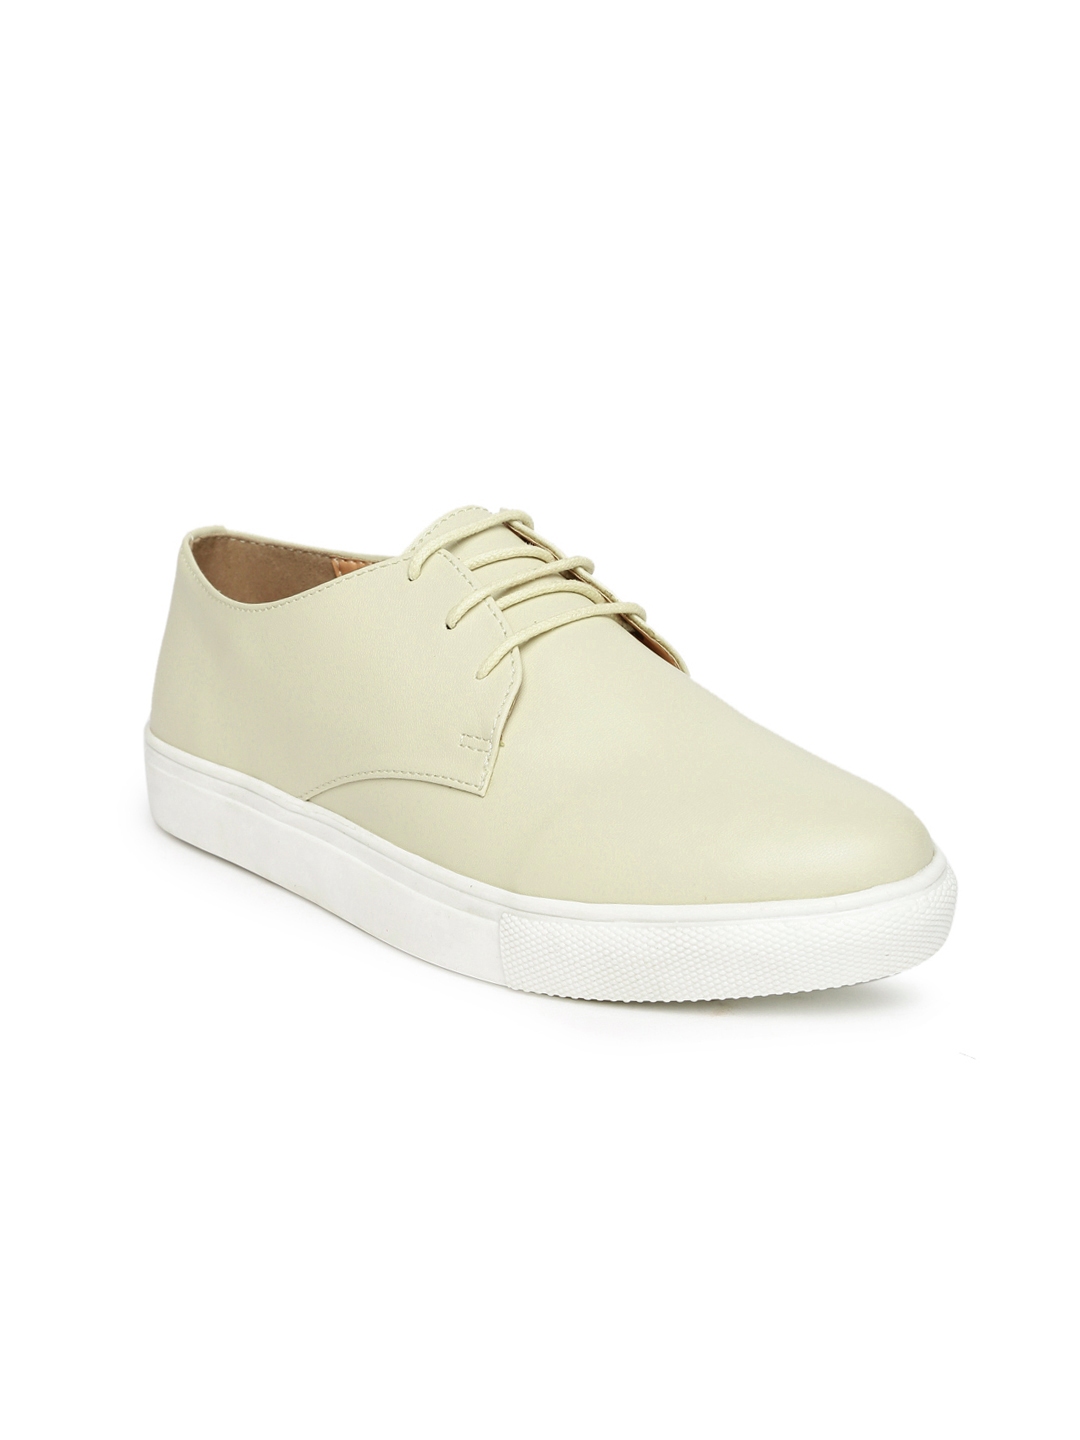 Cream Coloured Sneakers - Casual Shoes 